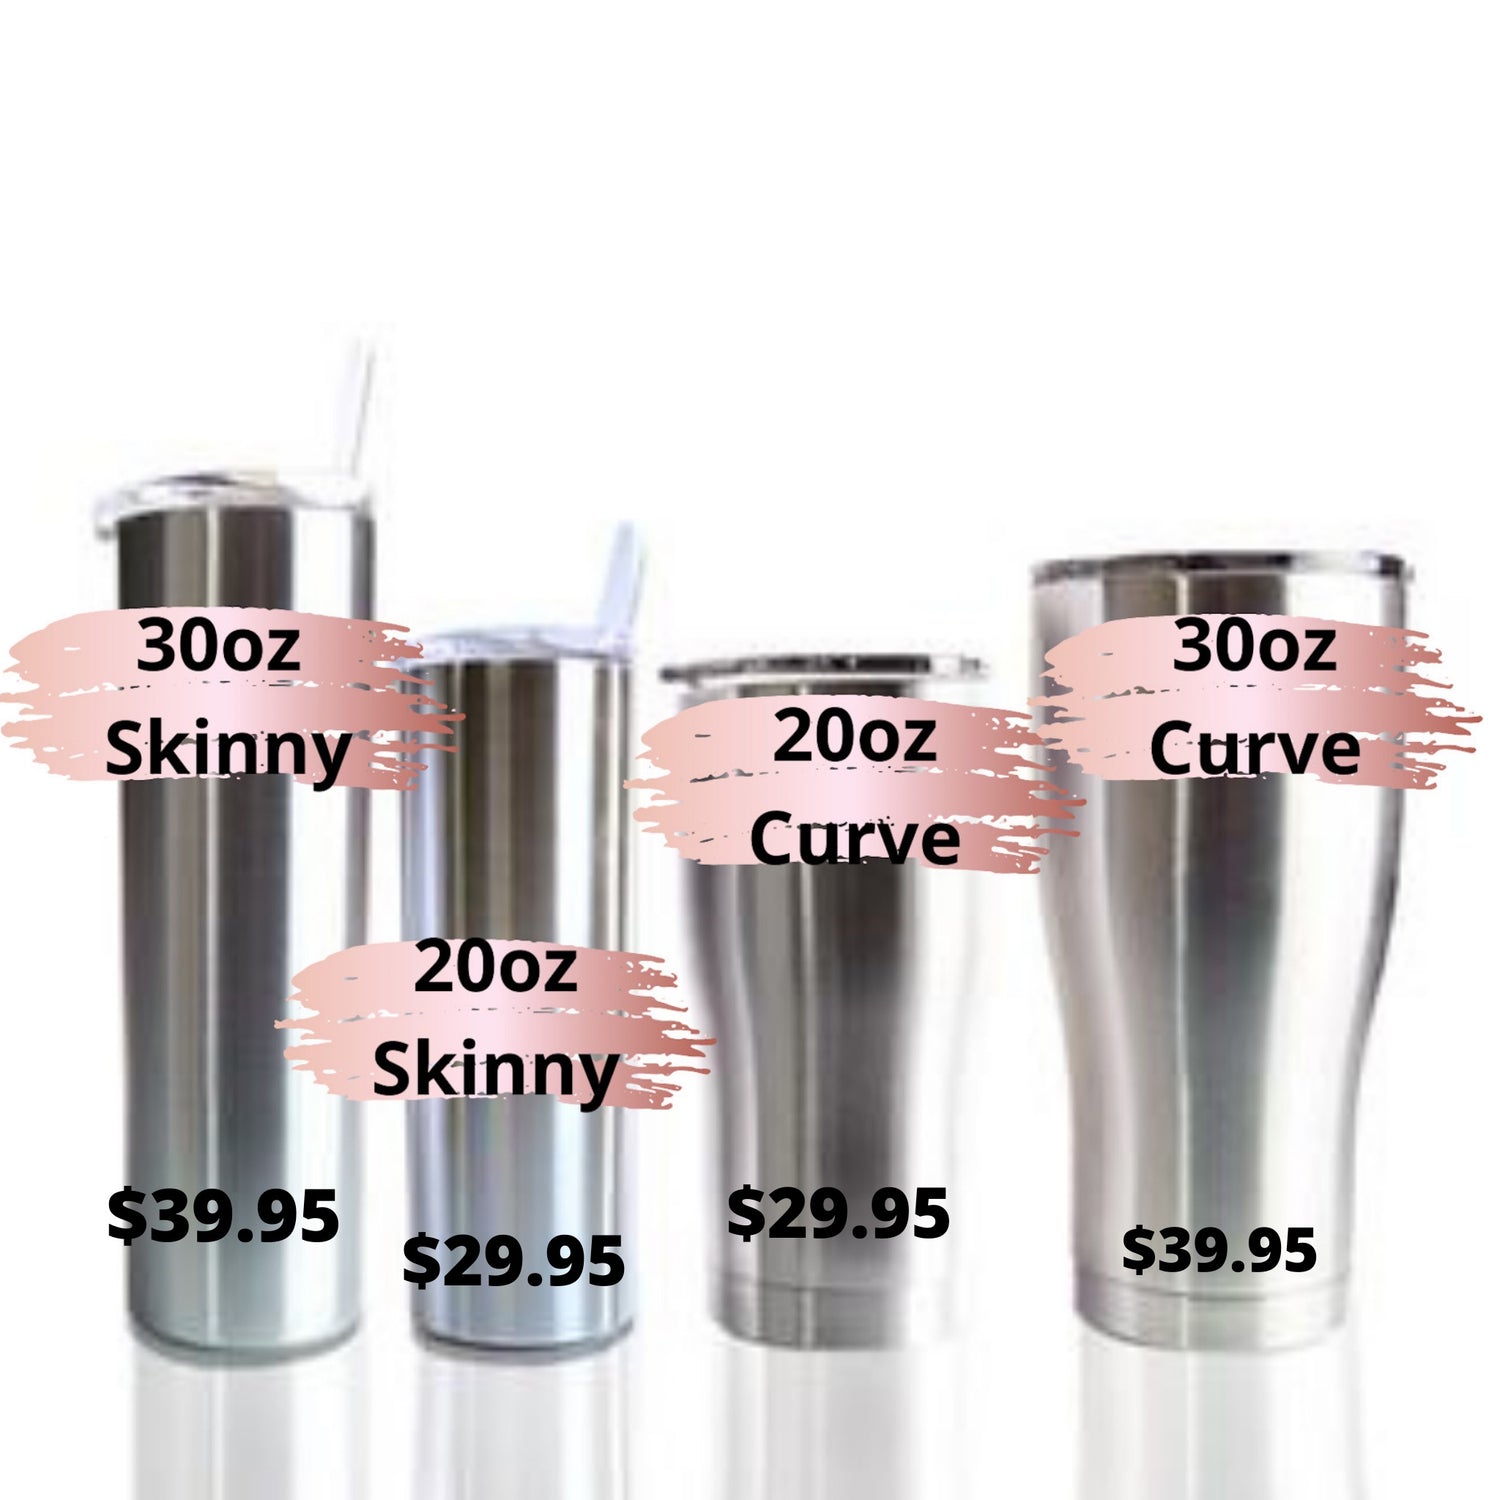 Write Your Own Personalized 20 oz. Stainless Steel Tumbler- White